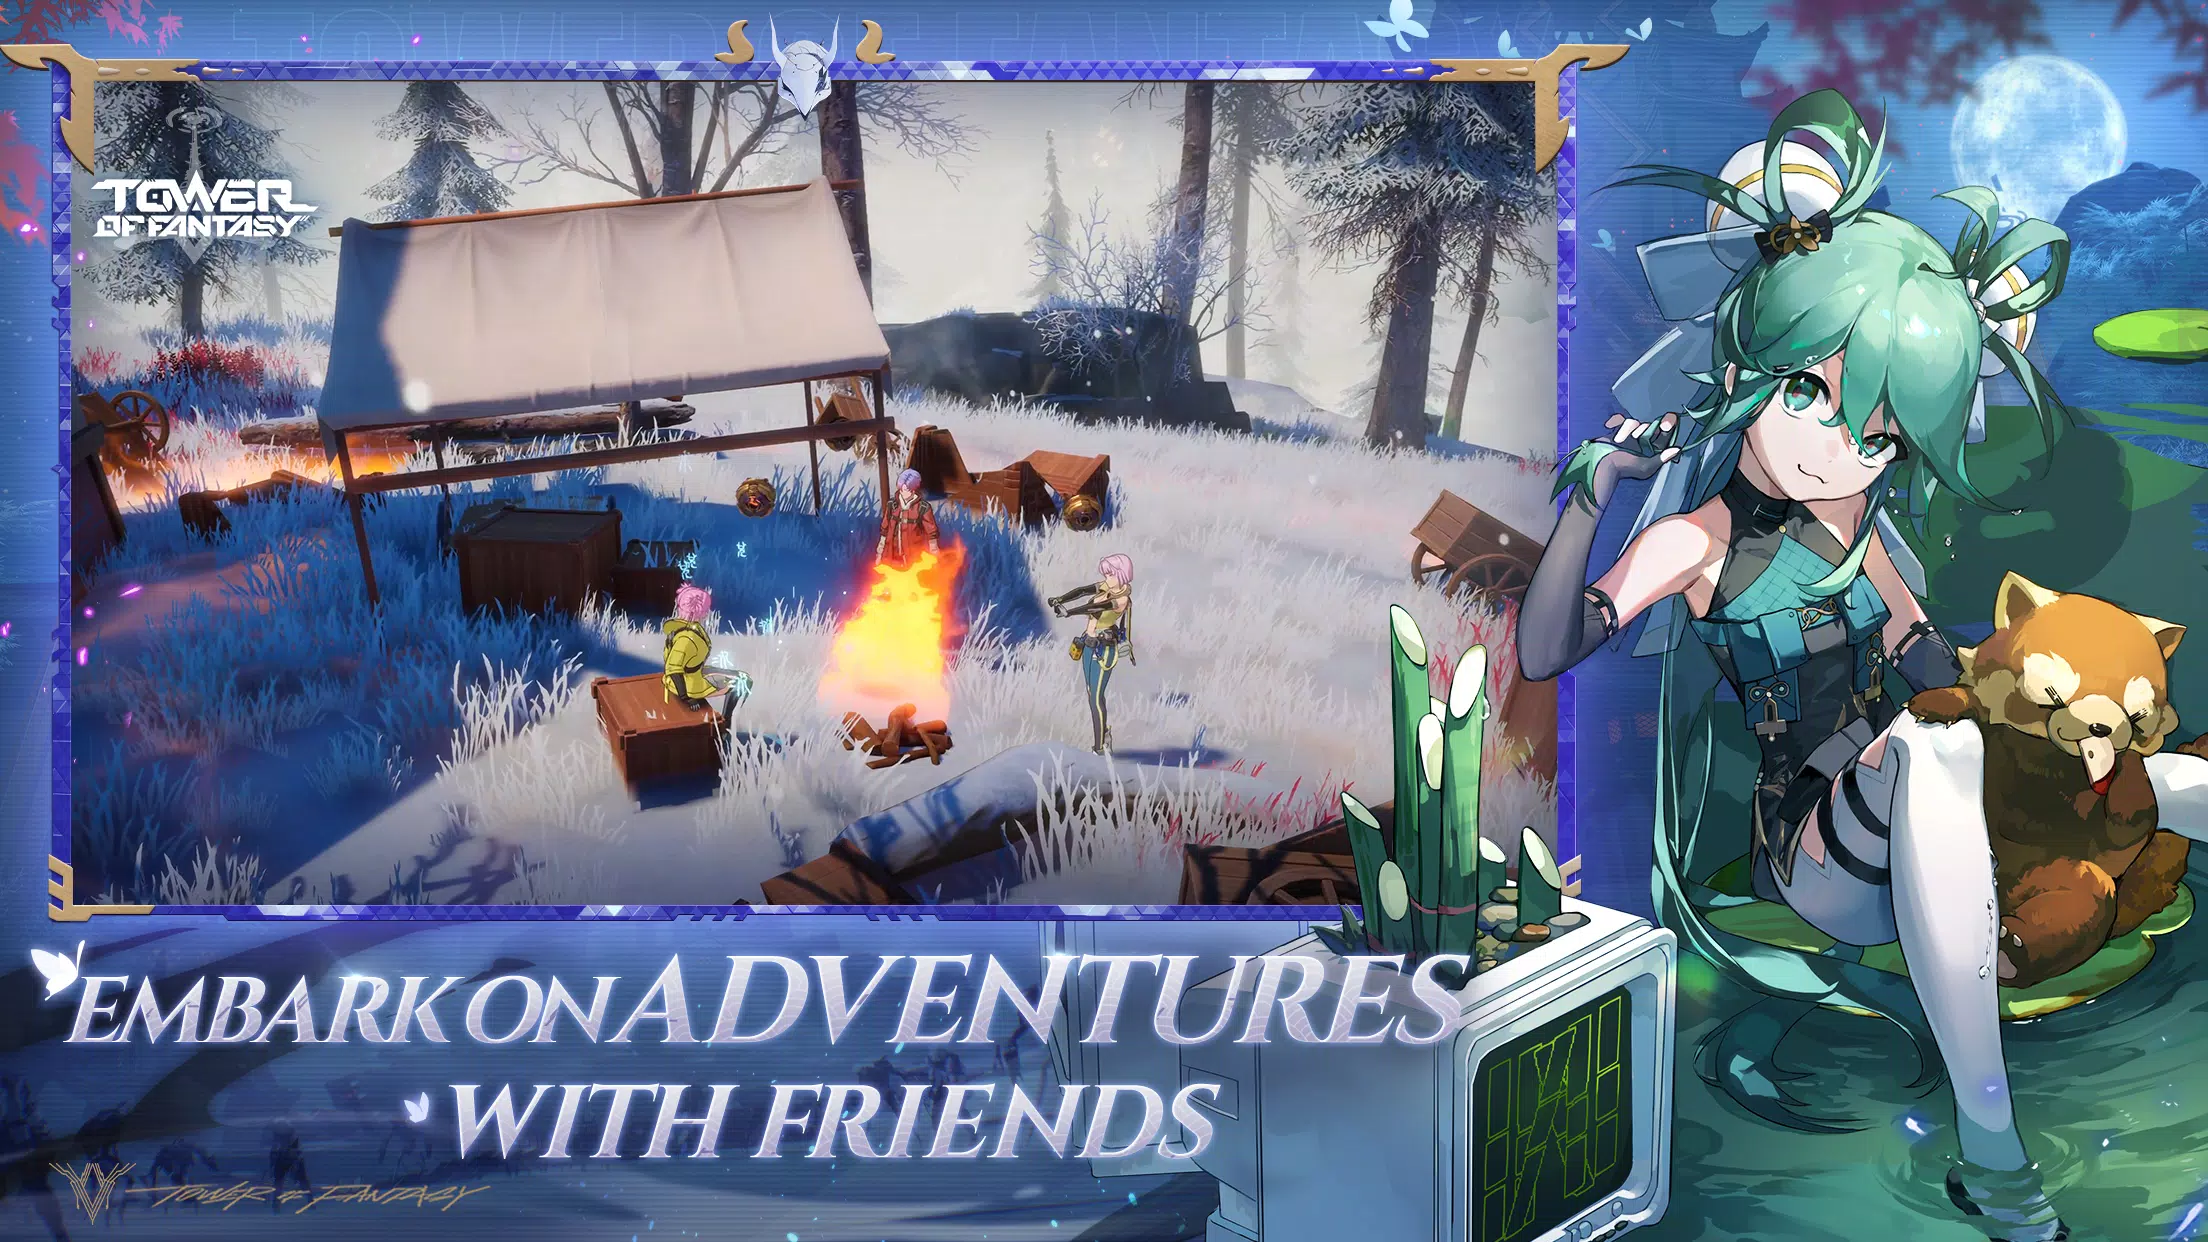 Tower of Fantasy 3.0.0 (56) APK Download by Level Infinite - APKMirror